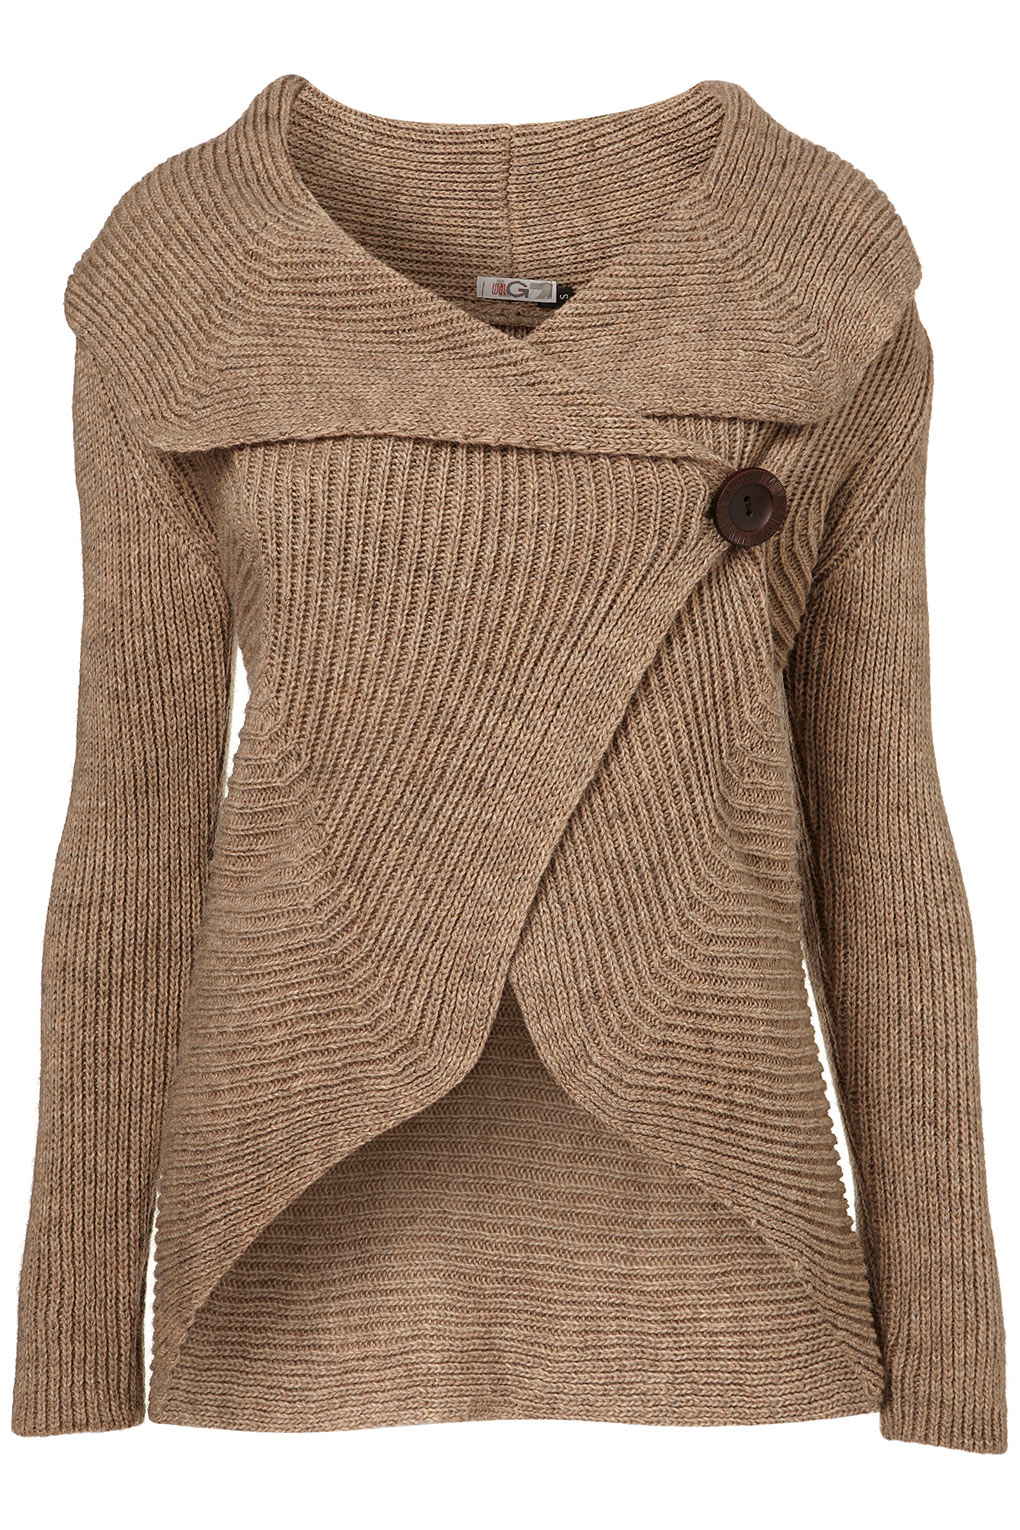 Topshop Button Knit Cardigan By Wal G** in Beige | Lyst